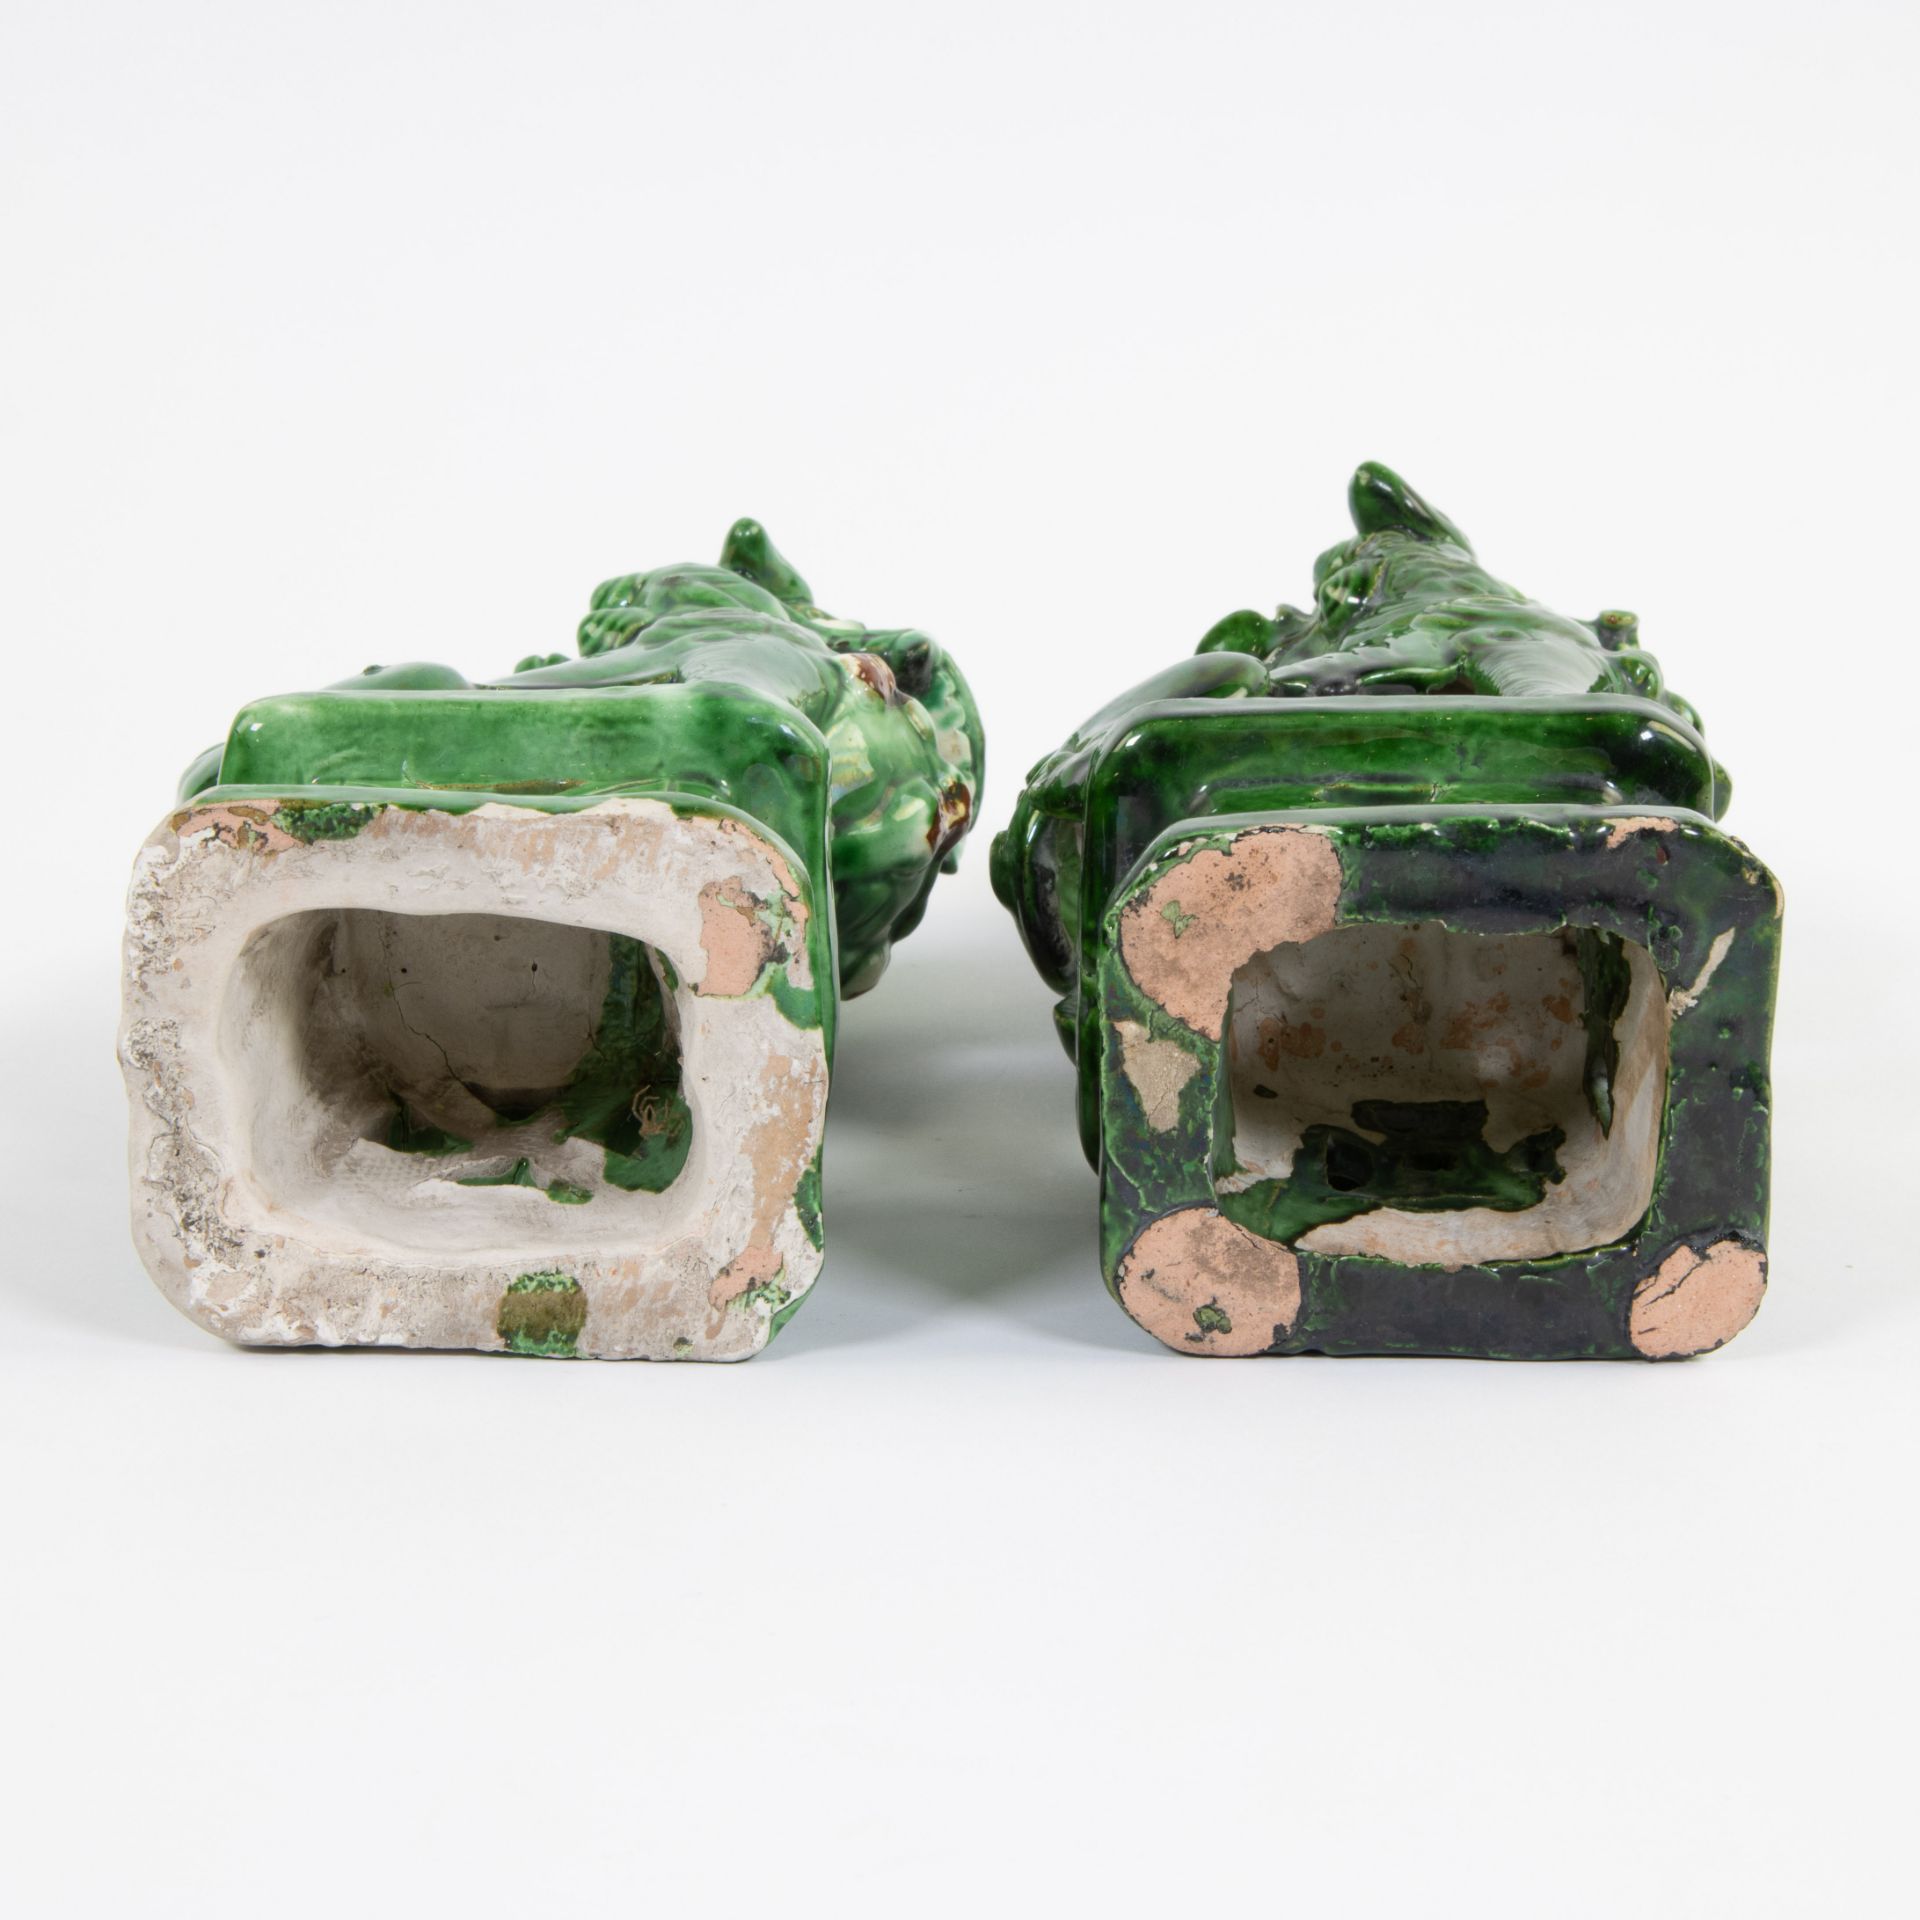 Collection of 2 green glazed ceramic Pho dogs - Image 5 of 5